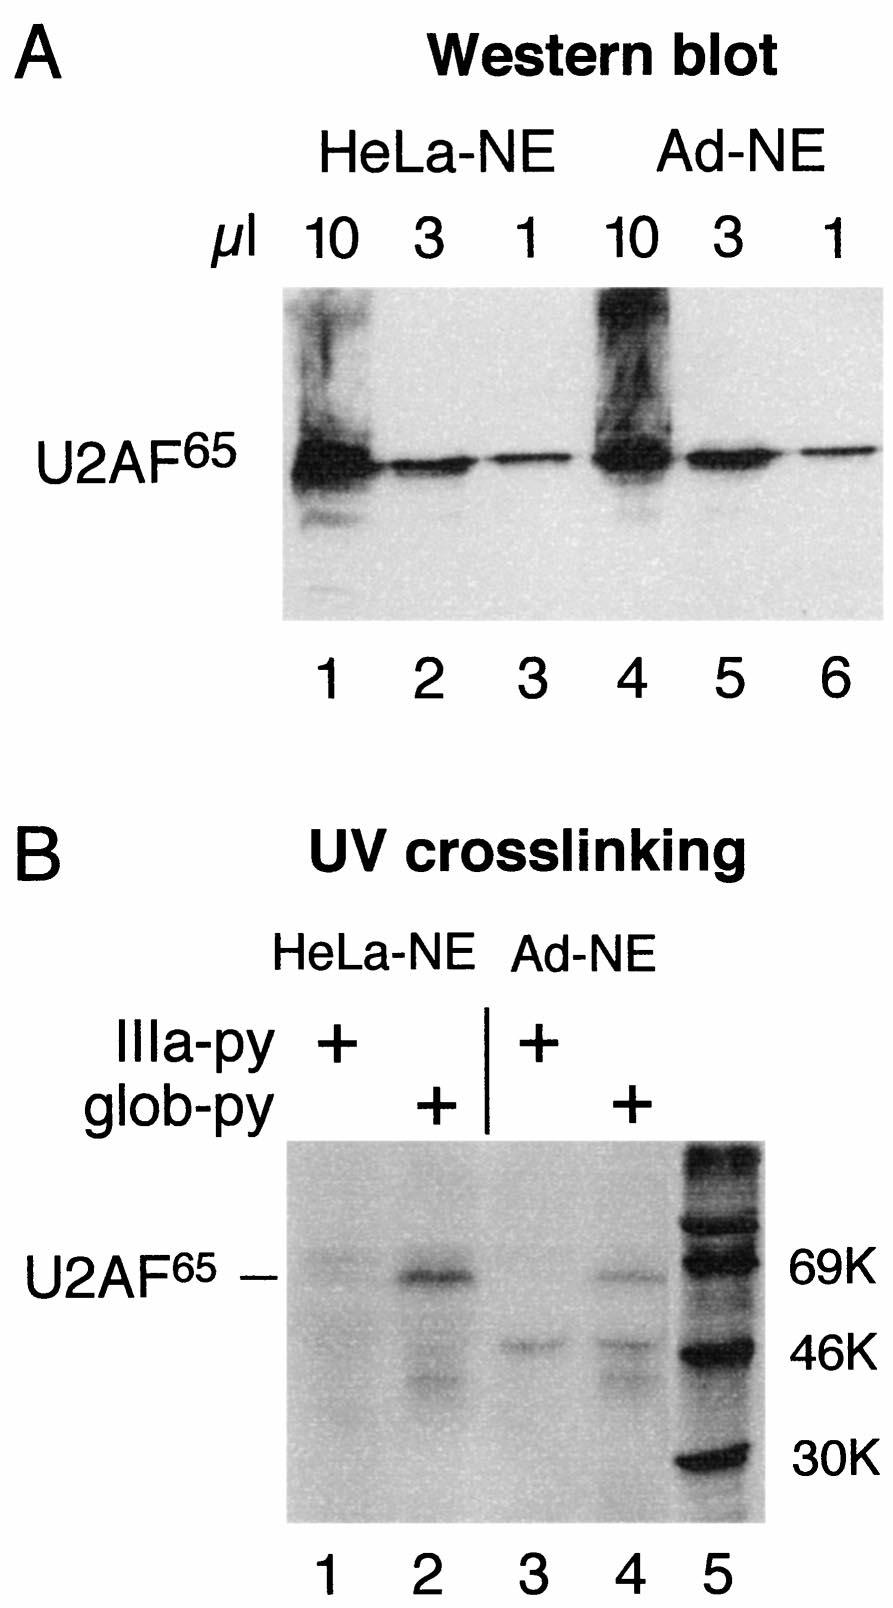 (B) The indicated pre-mrnas were incubated in HeLa-NE or Ad-NE, and splicing products were resolved by gel electrophoresis and visualized by autoradiography.